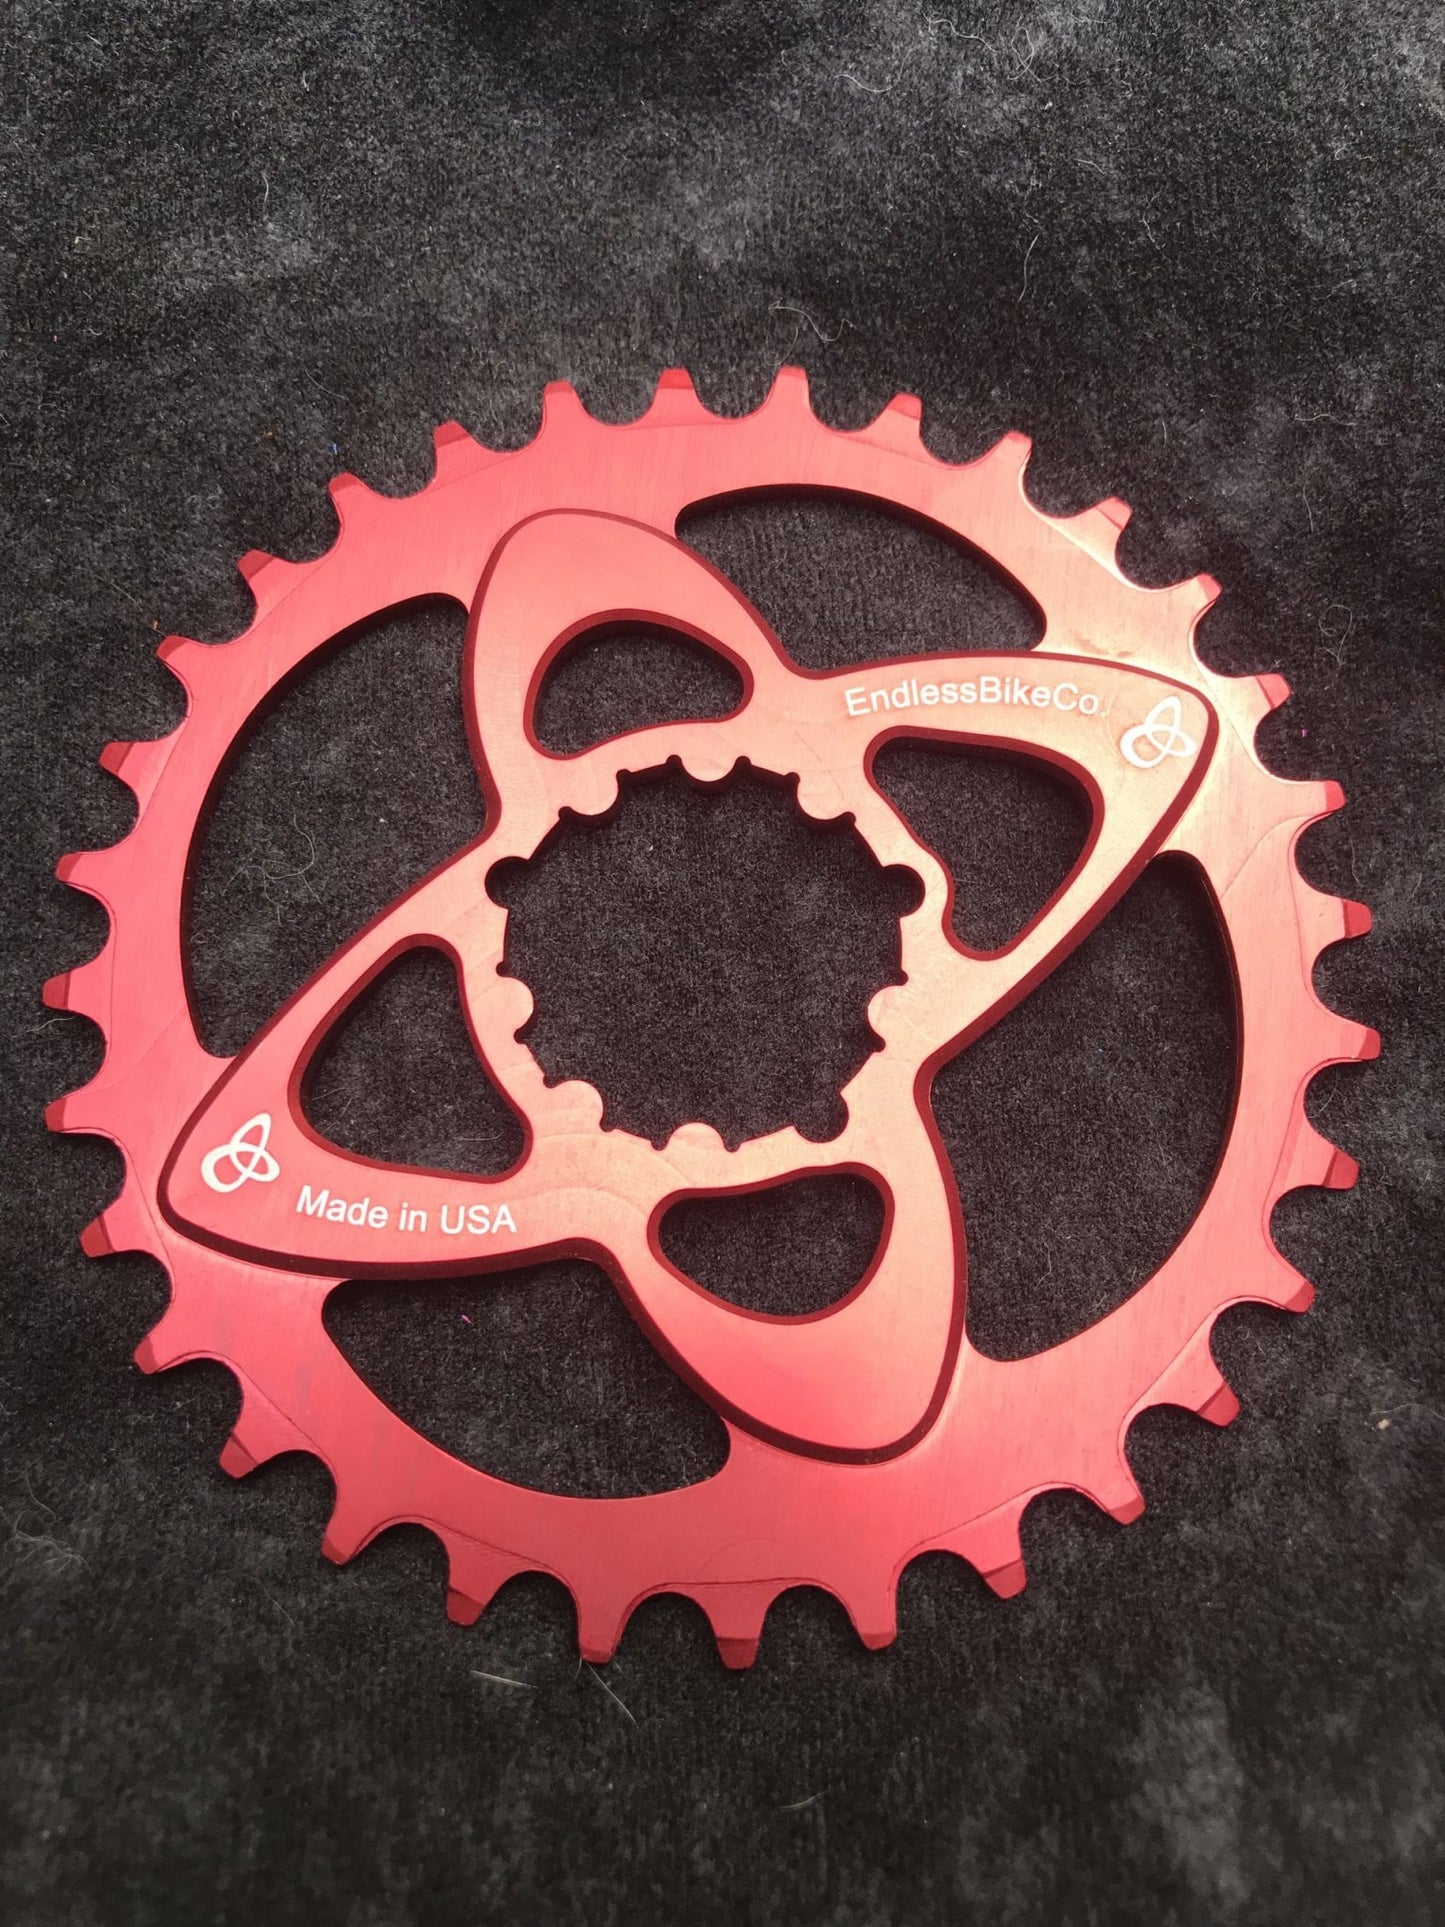 Endless Bike Co. Direct Mount Chainrings